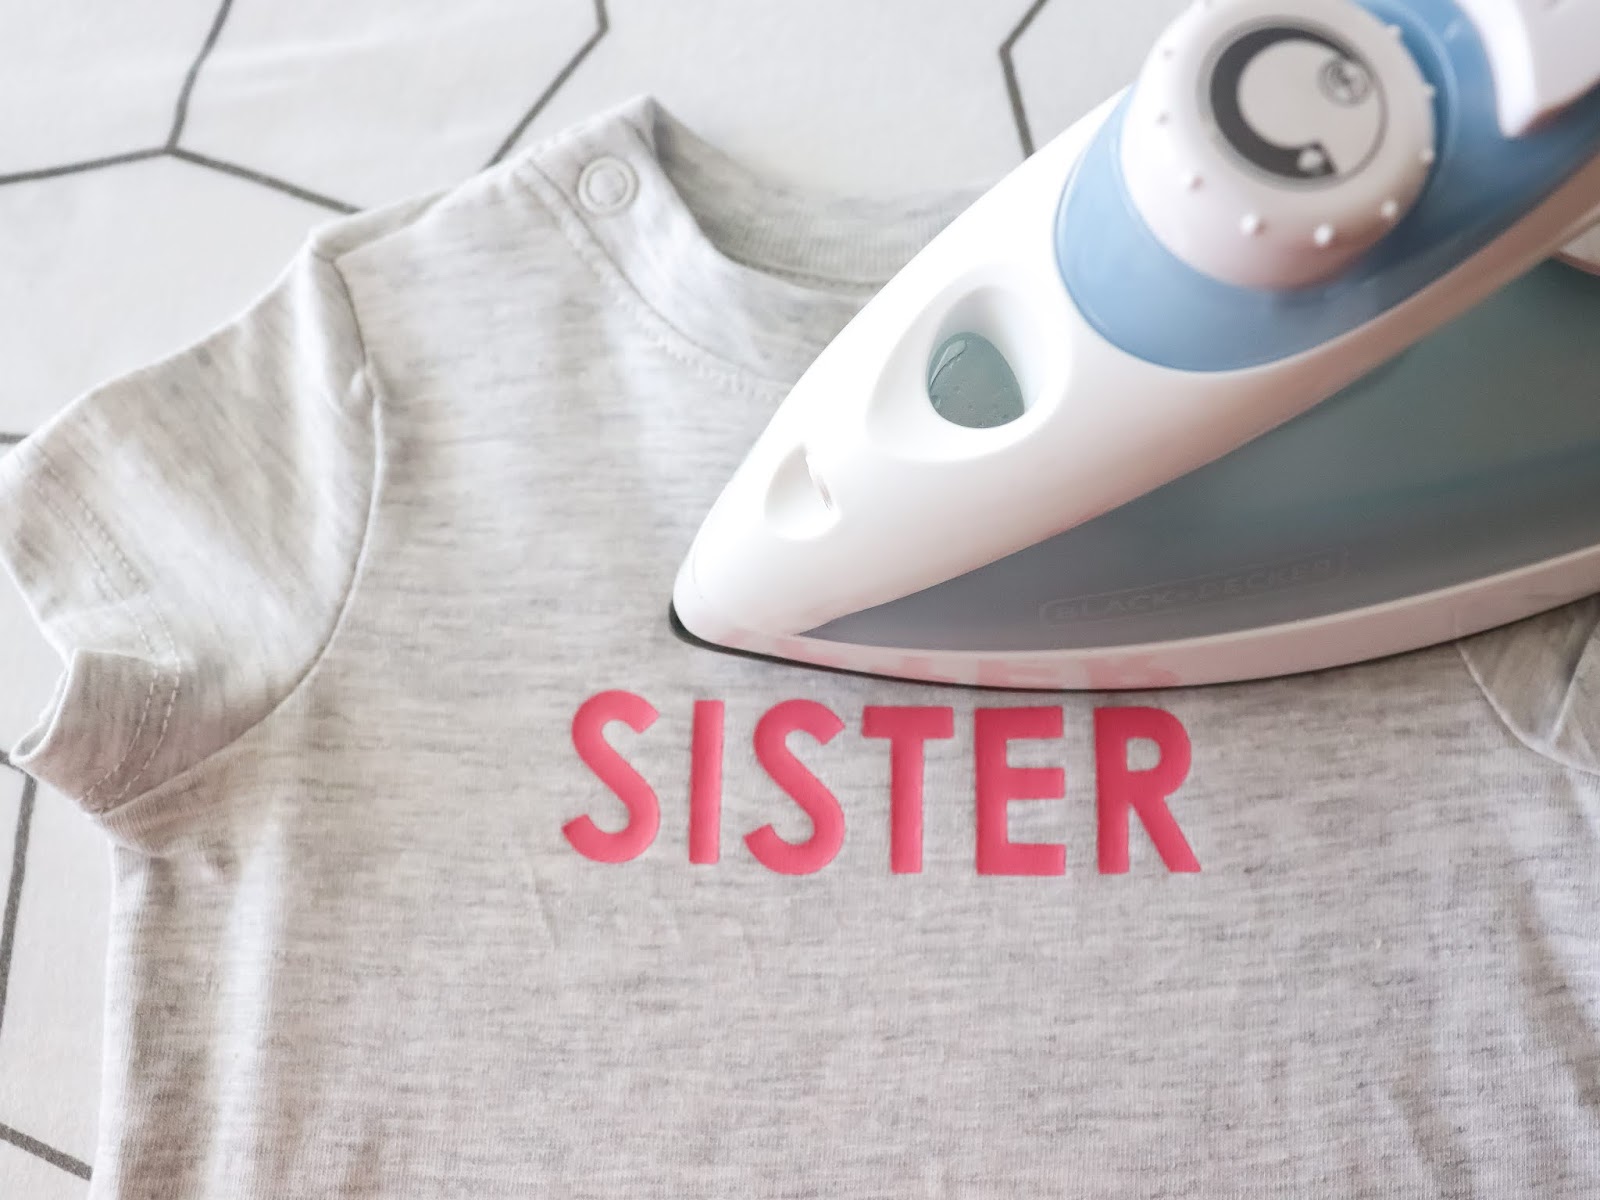 Big and little sister shirts